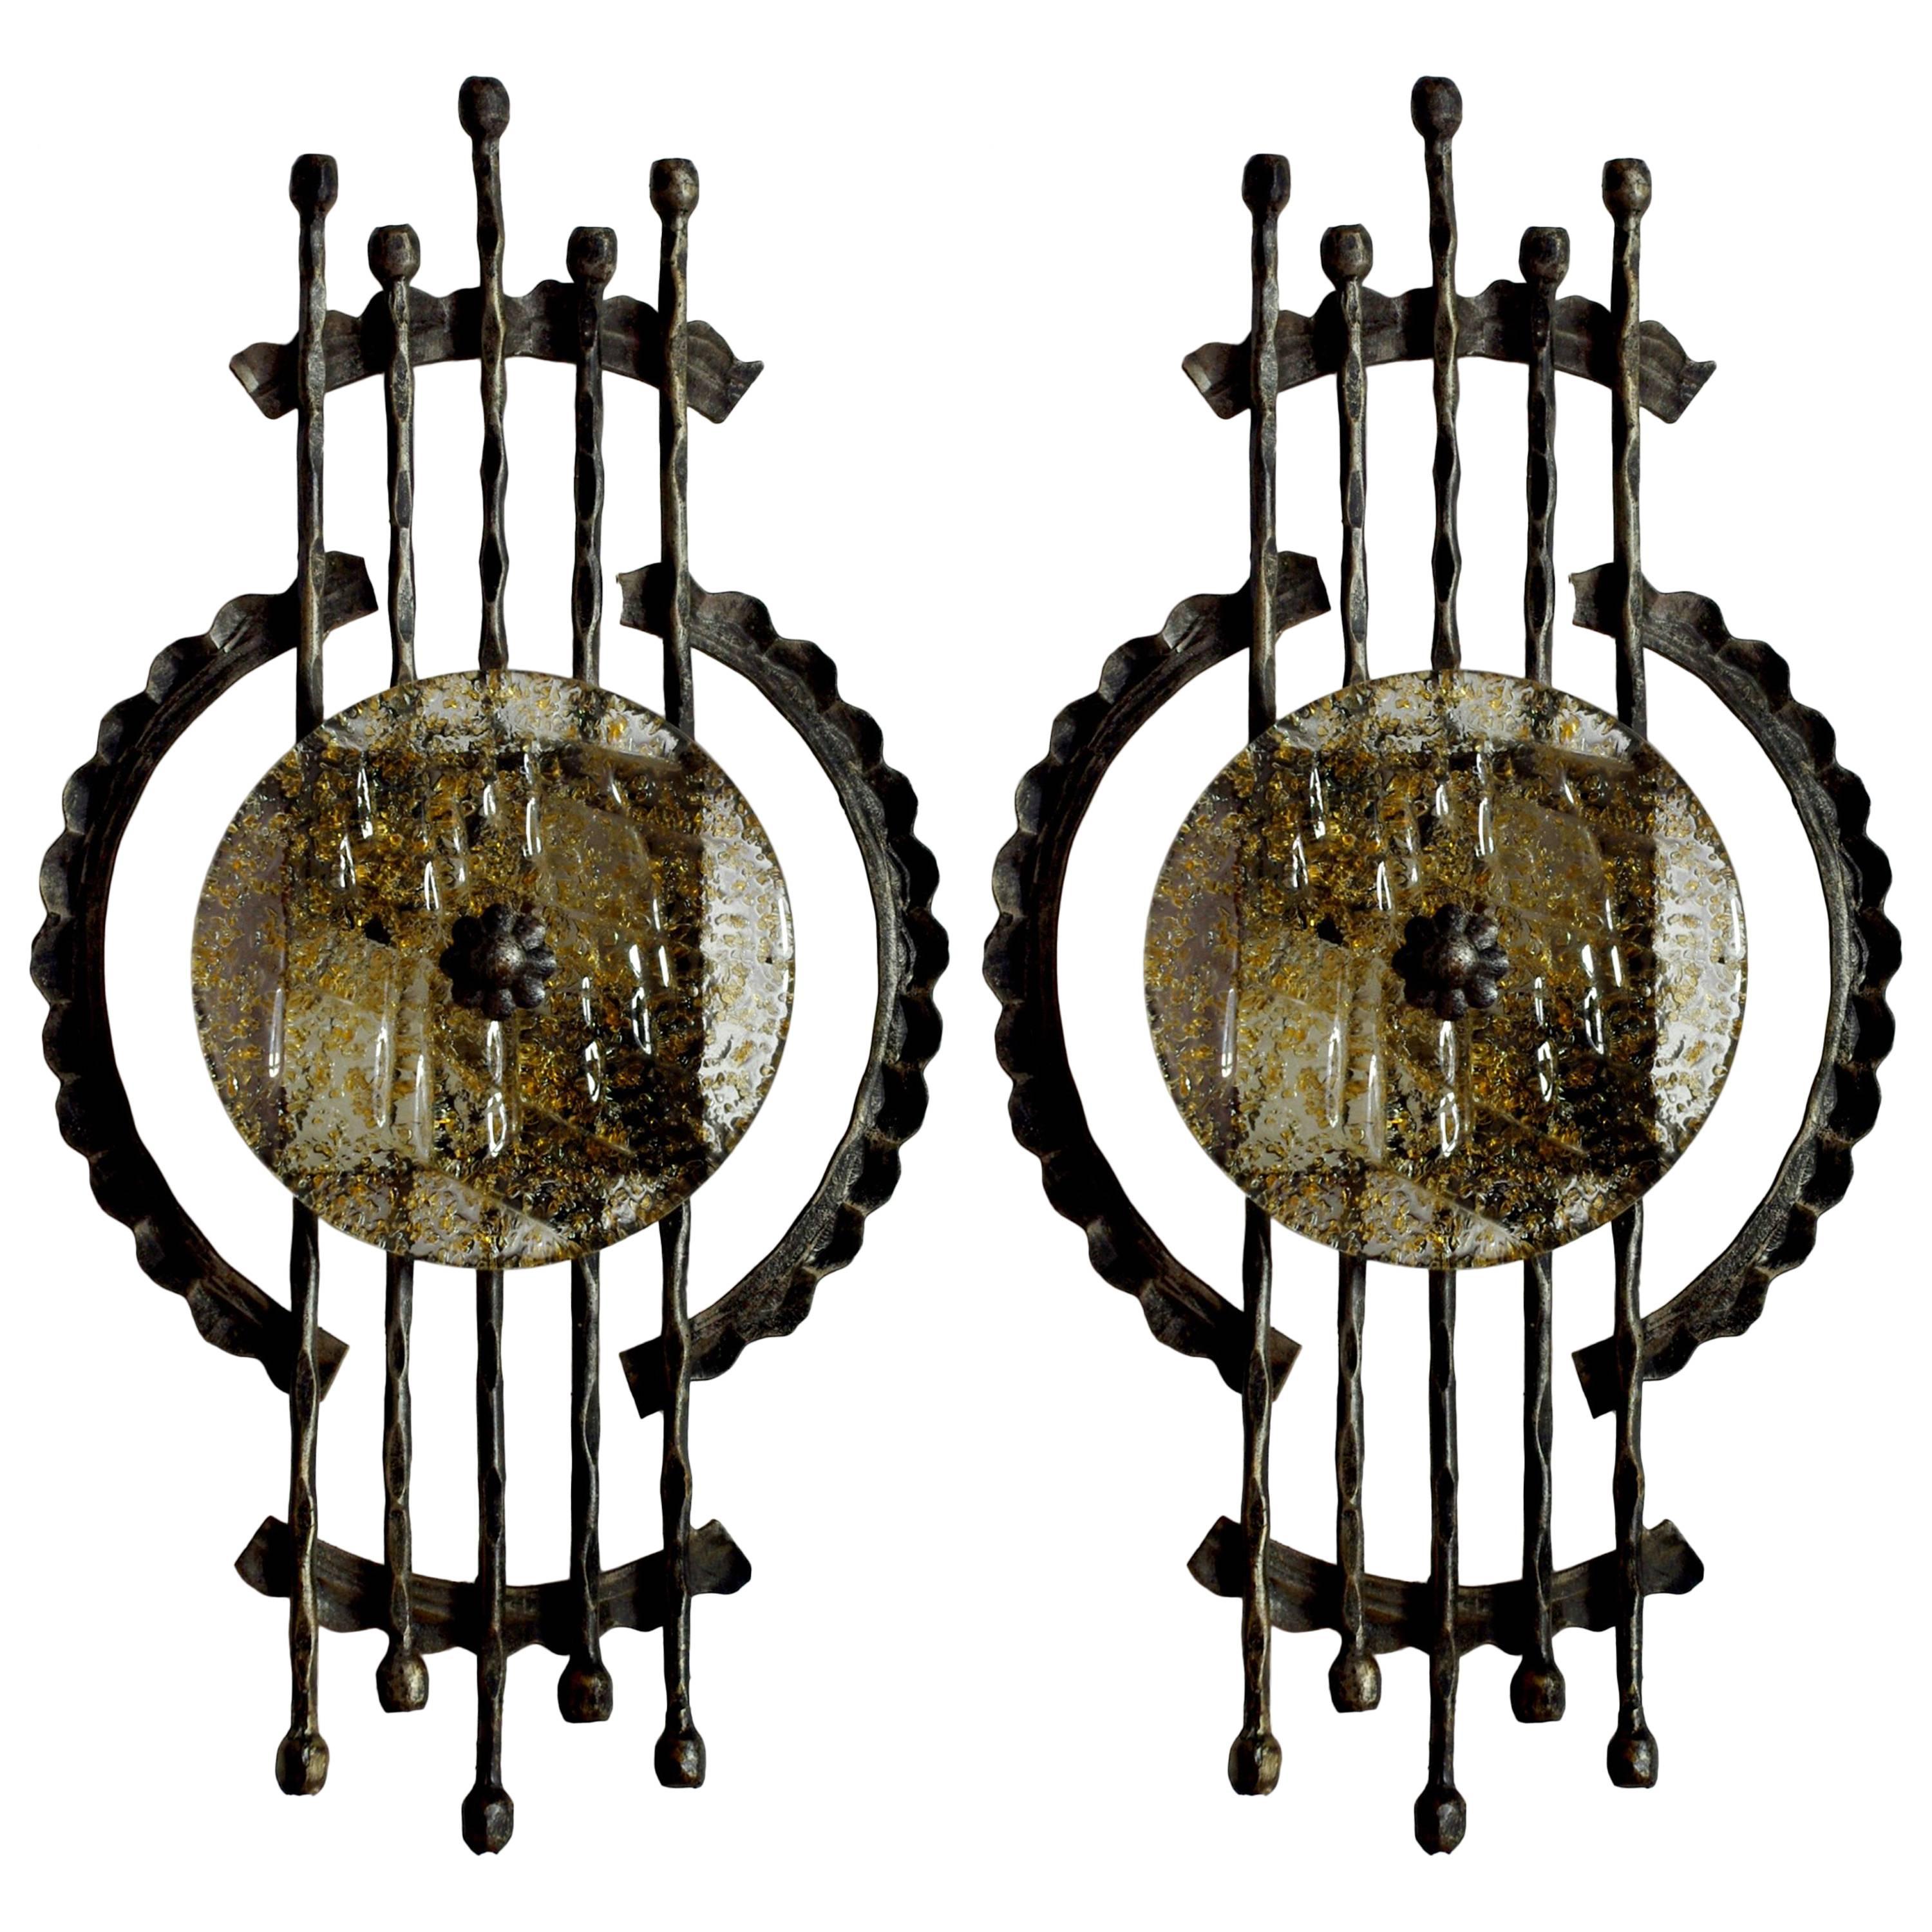 Pair of Large Sculptural Iron and Glass Wall Flush Mounts Sconces, 1960s